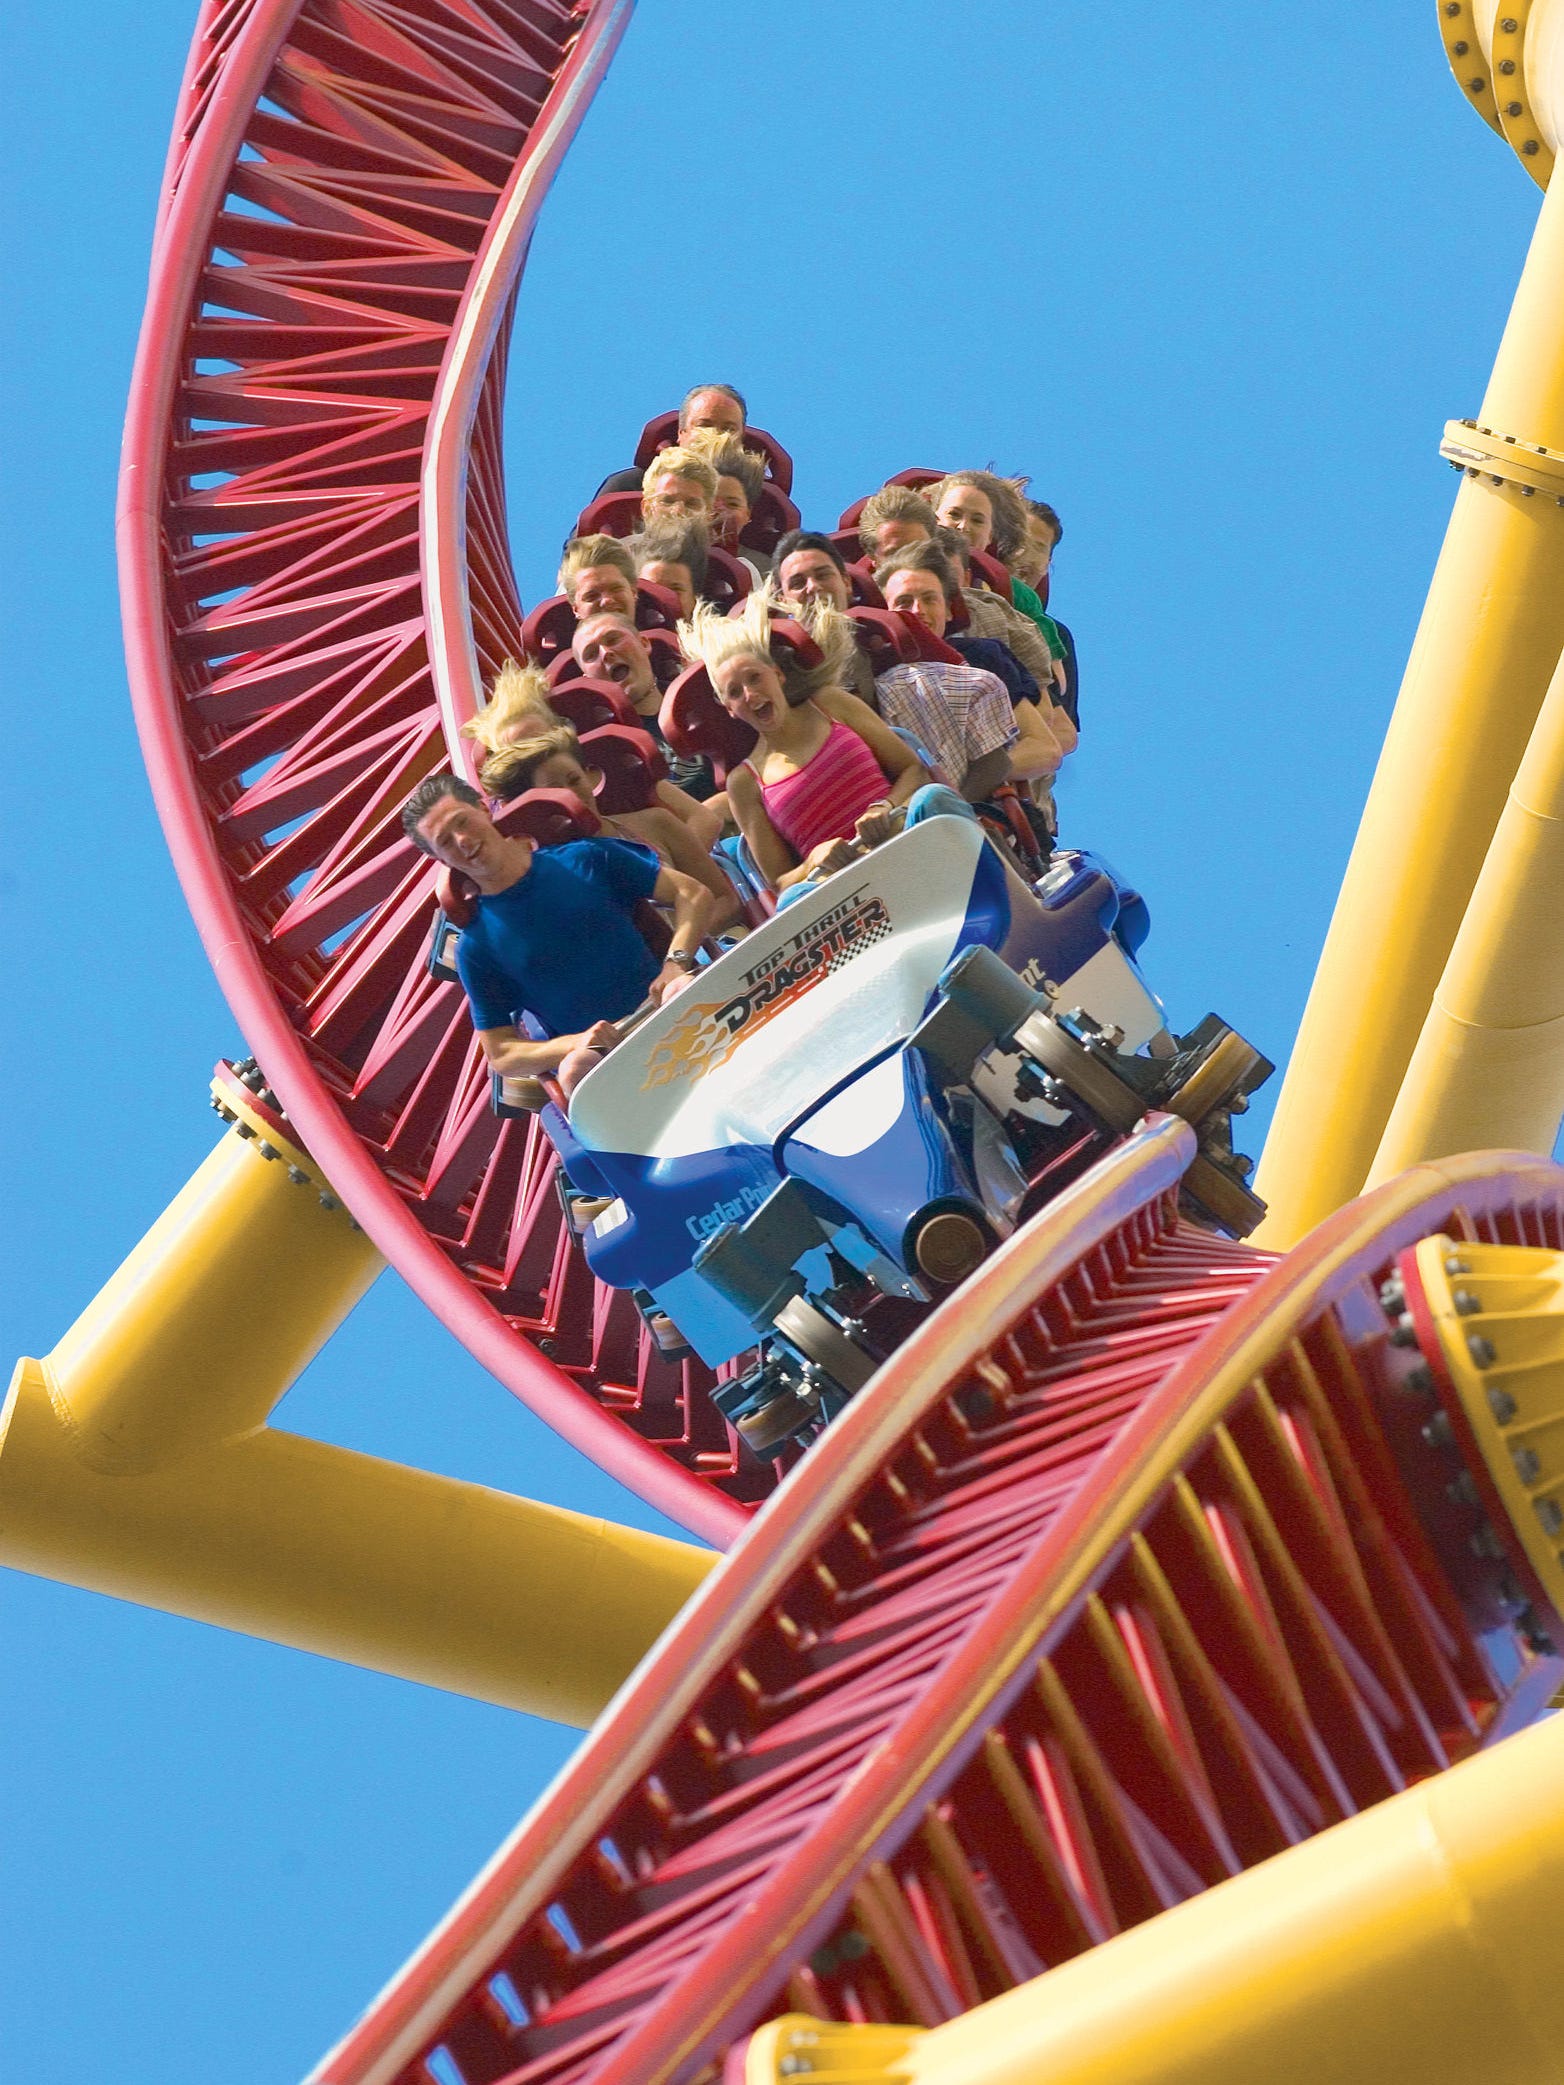 People riding a red and yellow roller coaster.